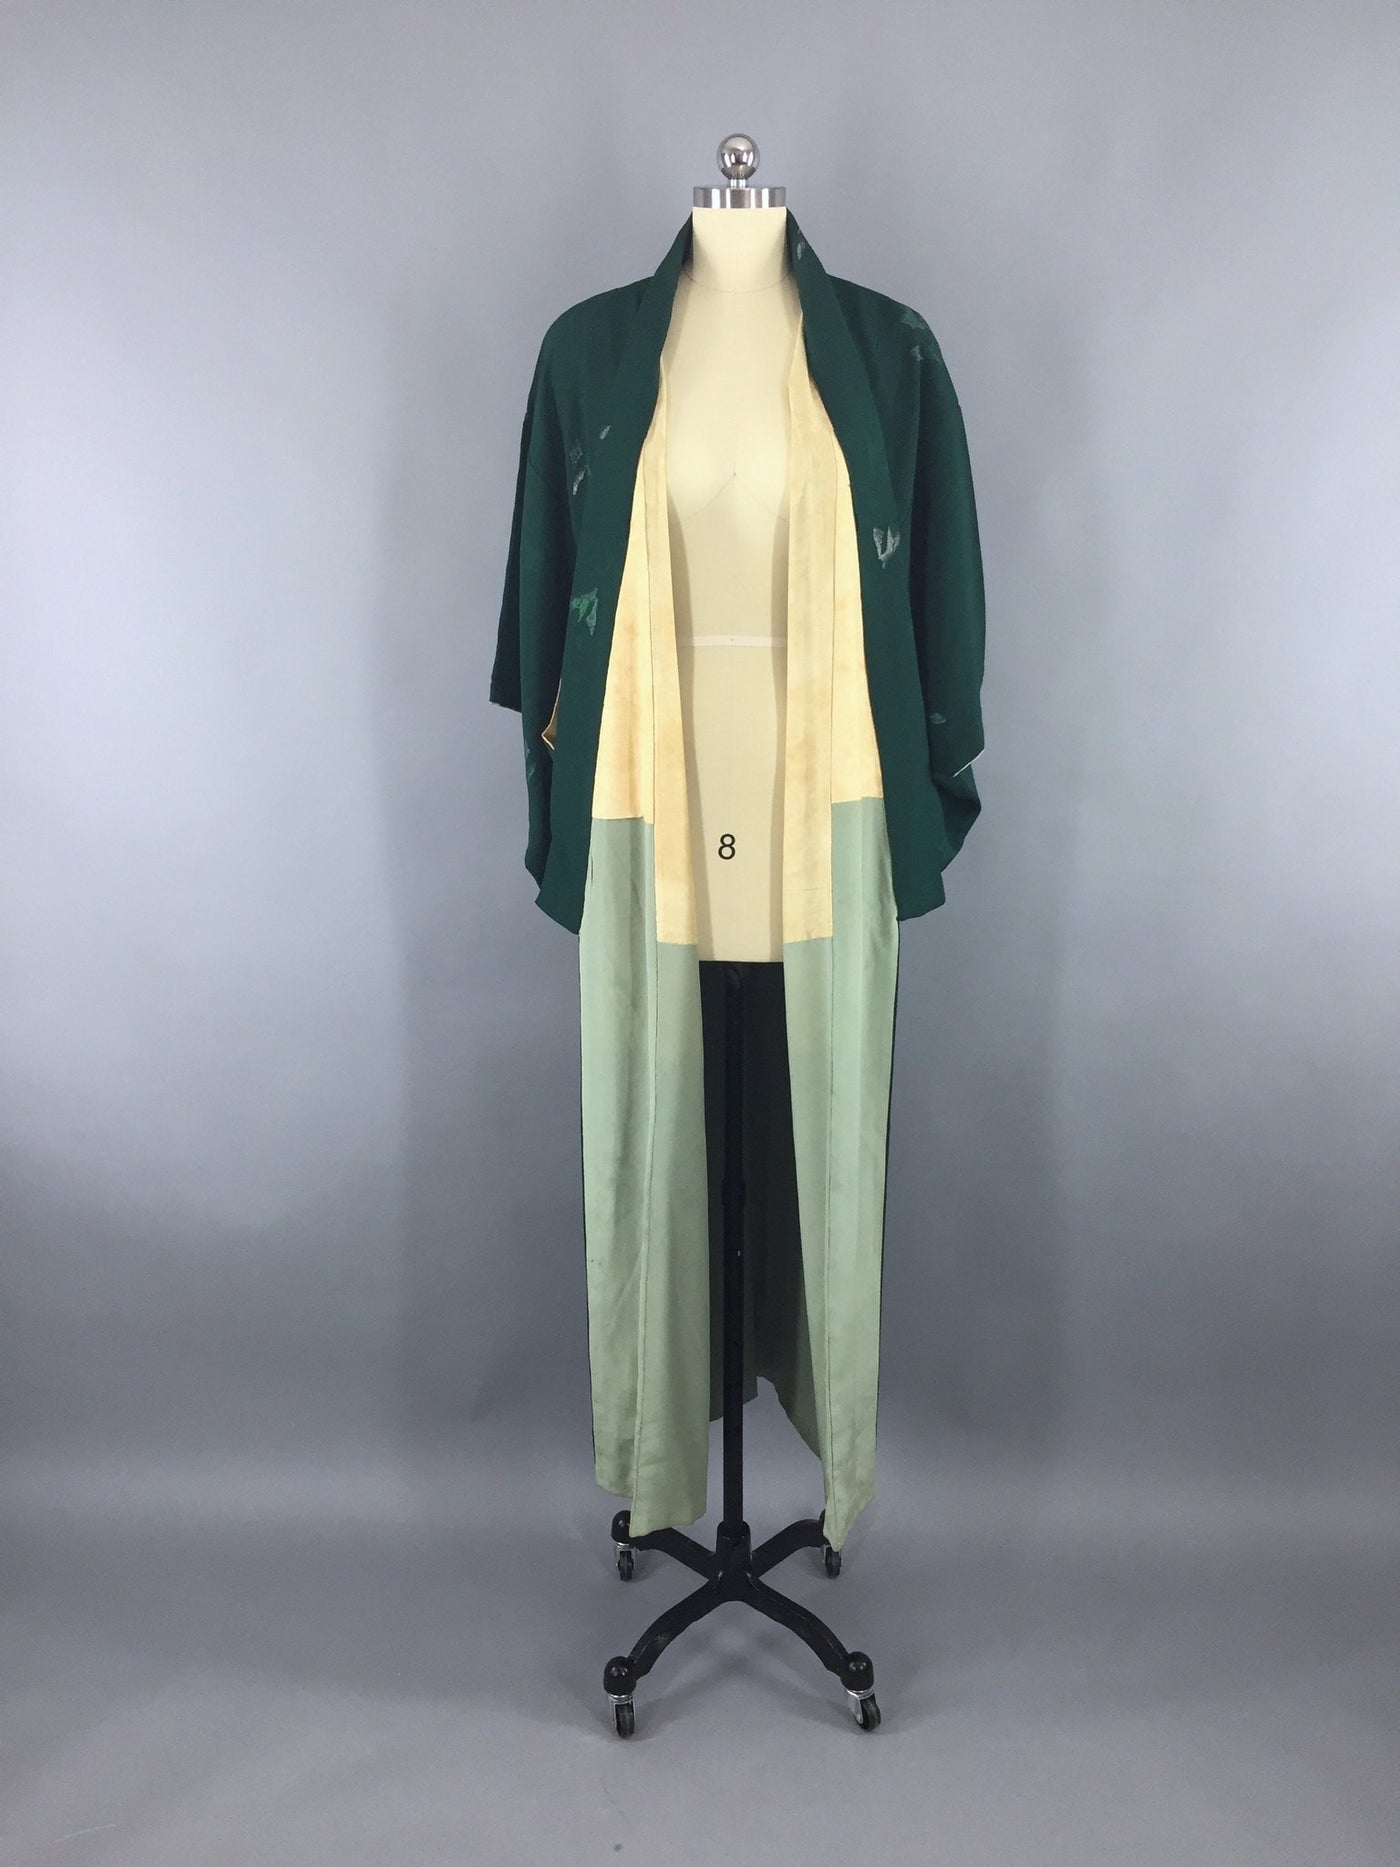 Vintage 1950s Silk Kimono Robe in Forest Green and Silver Urushi Embroidery - ThisBlueBird